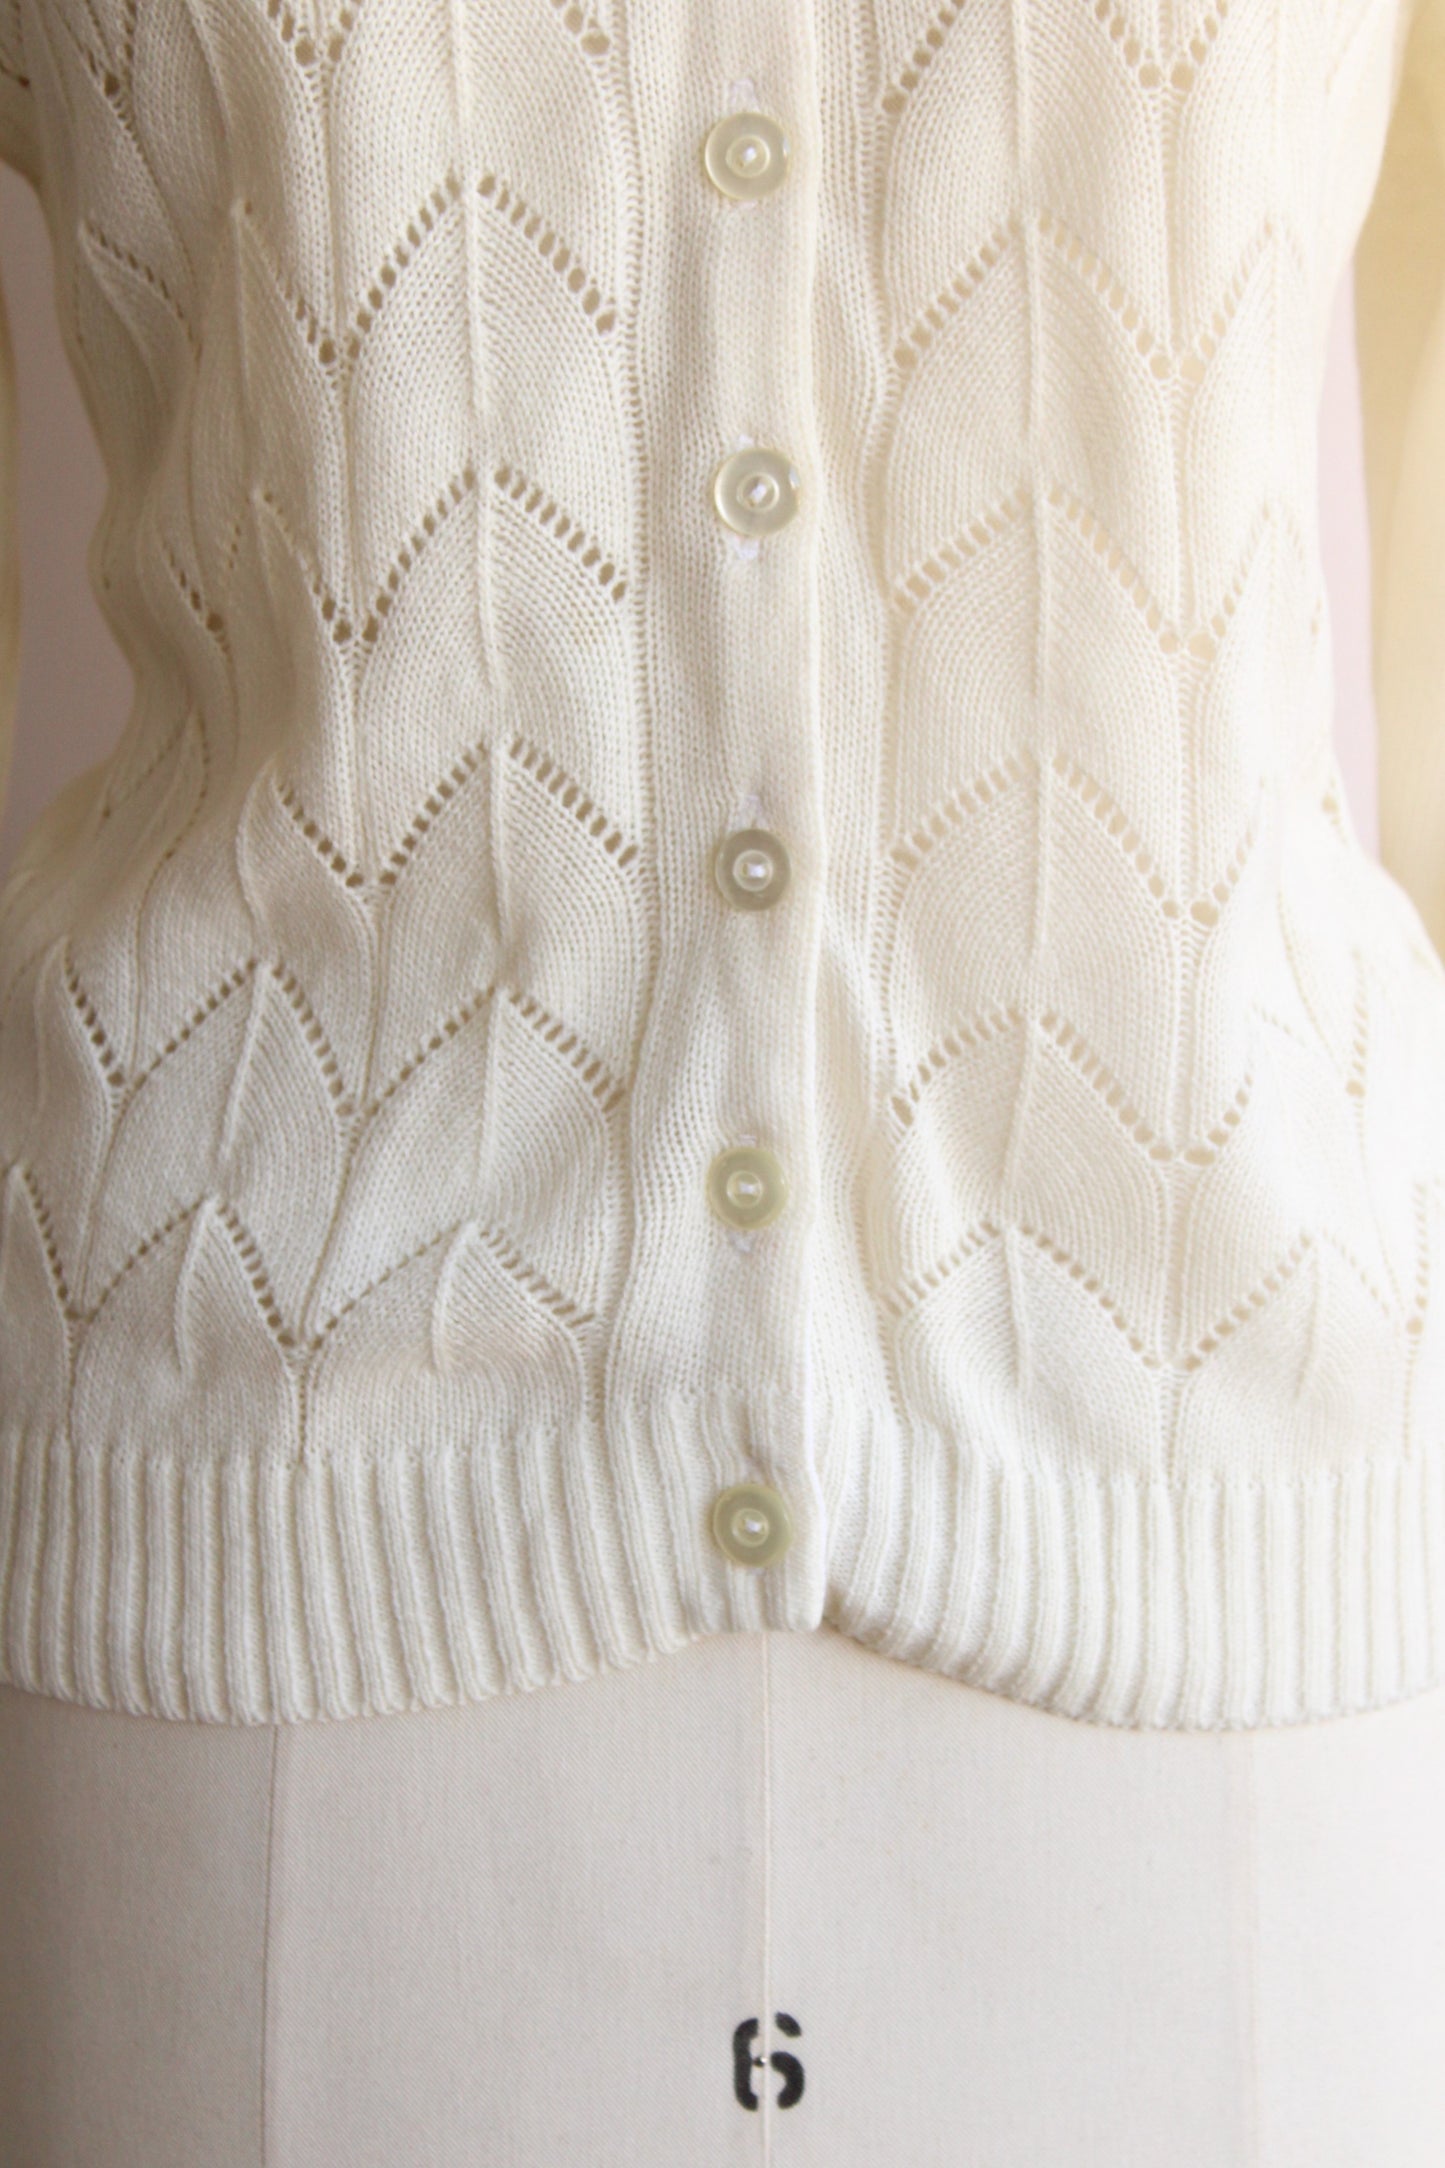 Vintage 1980s Pointelle Knit Sweater in Winter White